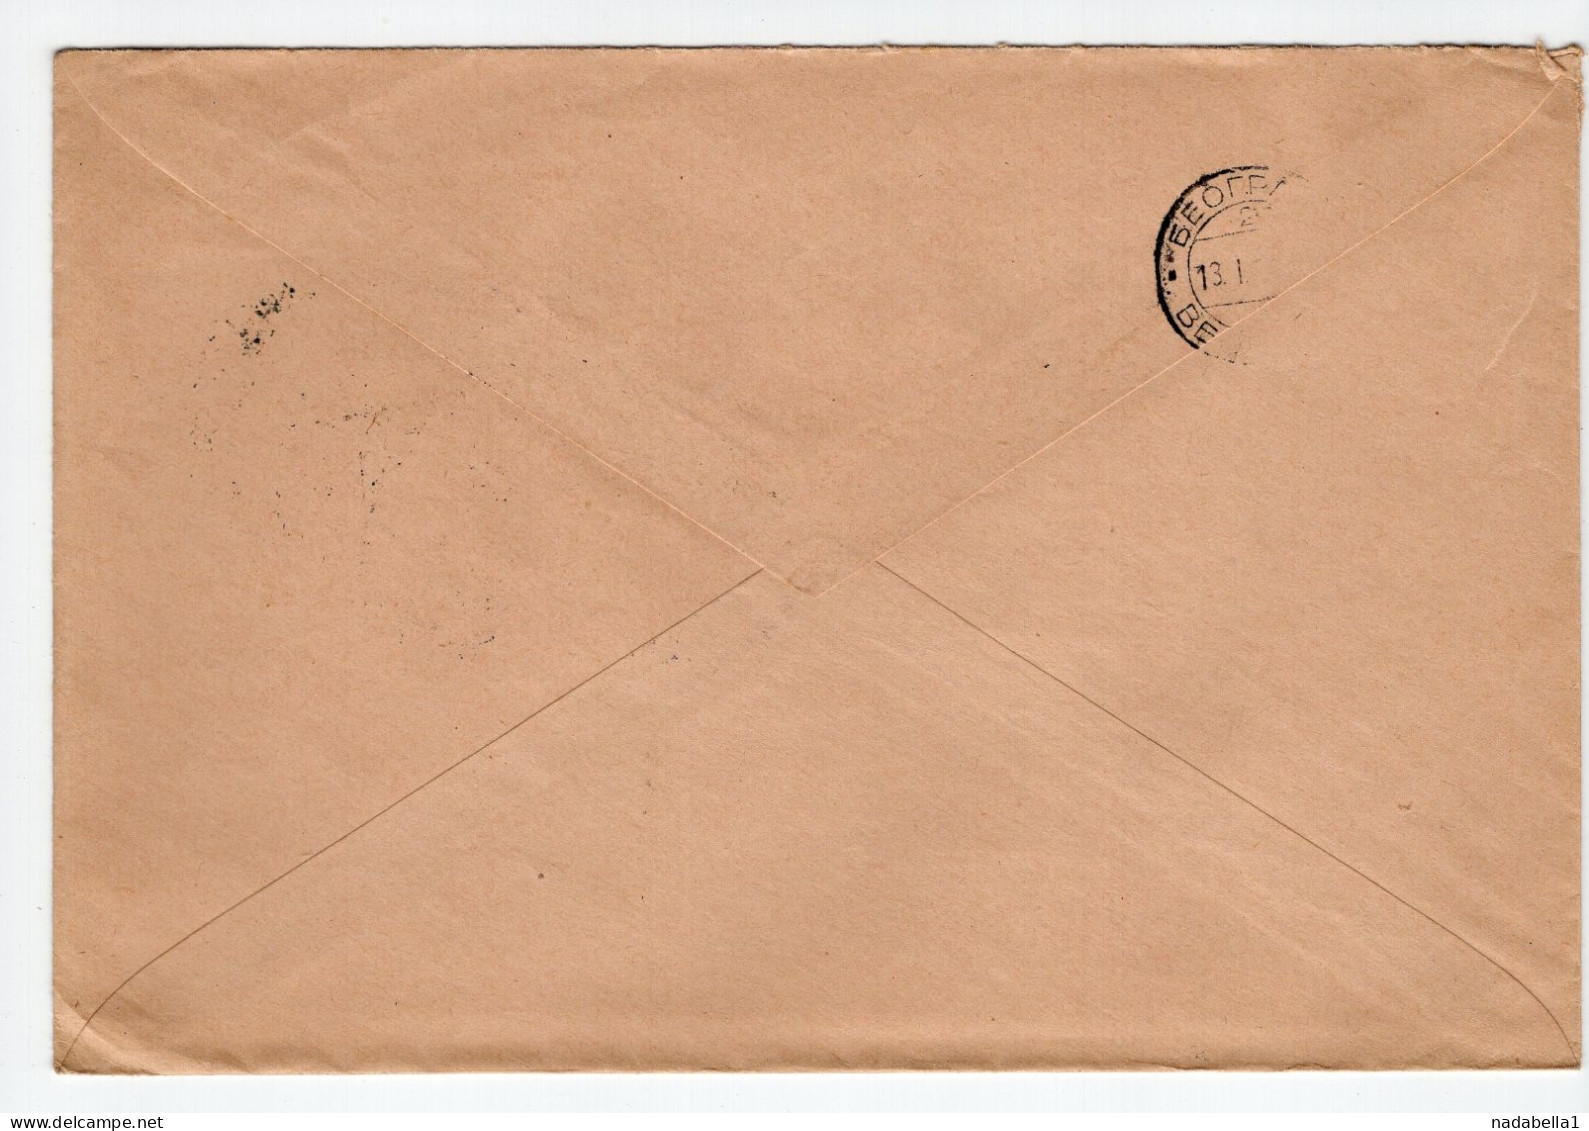 1934. KINGDOM OF YUGOSLAVIA,CROATIA,ZAGREB NAVY COMMAND OF THE 4th ARMY DISTRICT,OFFICIAL TO BELGRADE,POSTAGE DUE - Postage Due